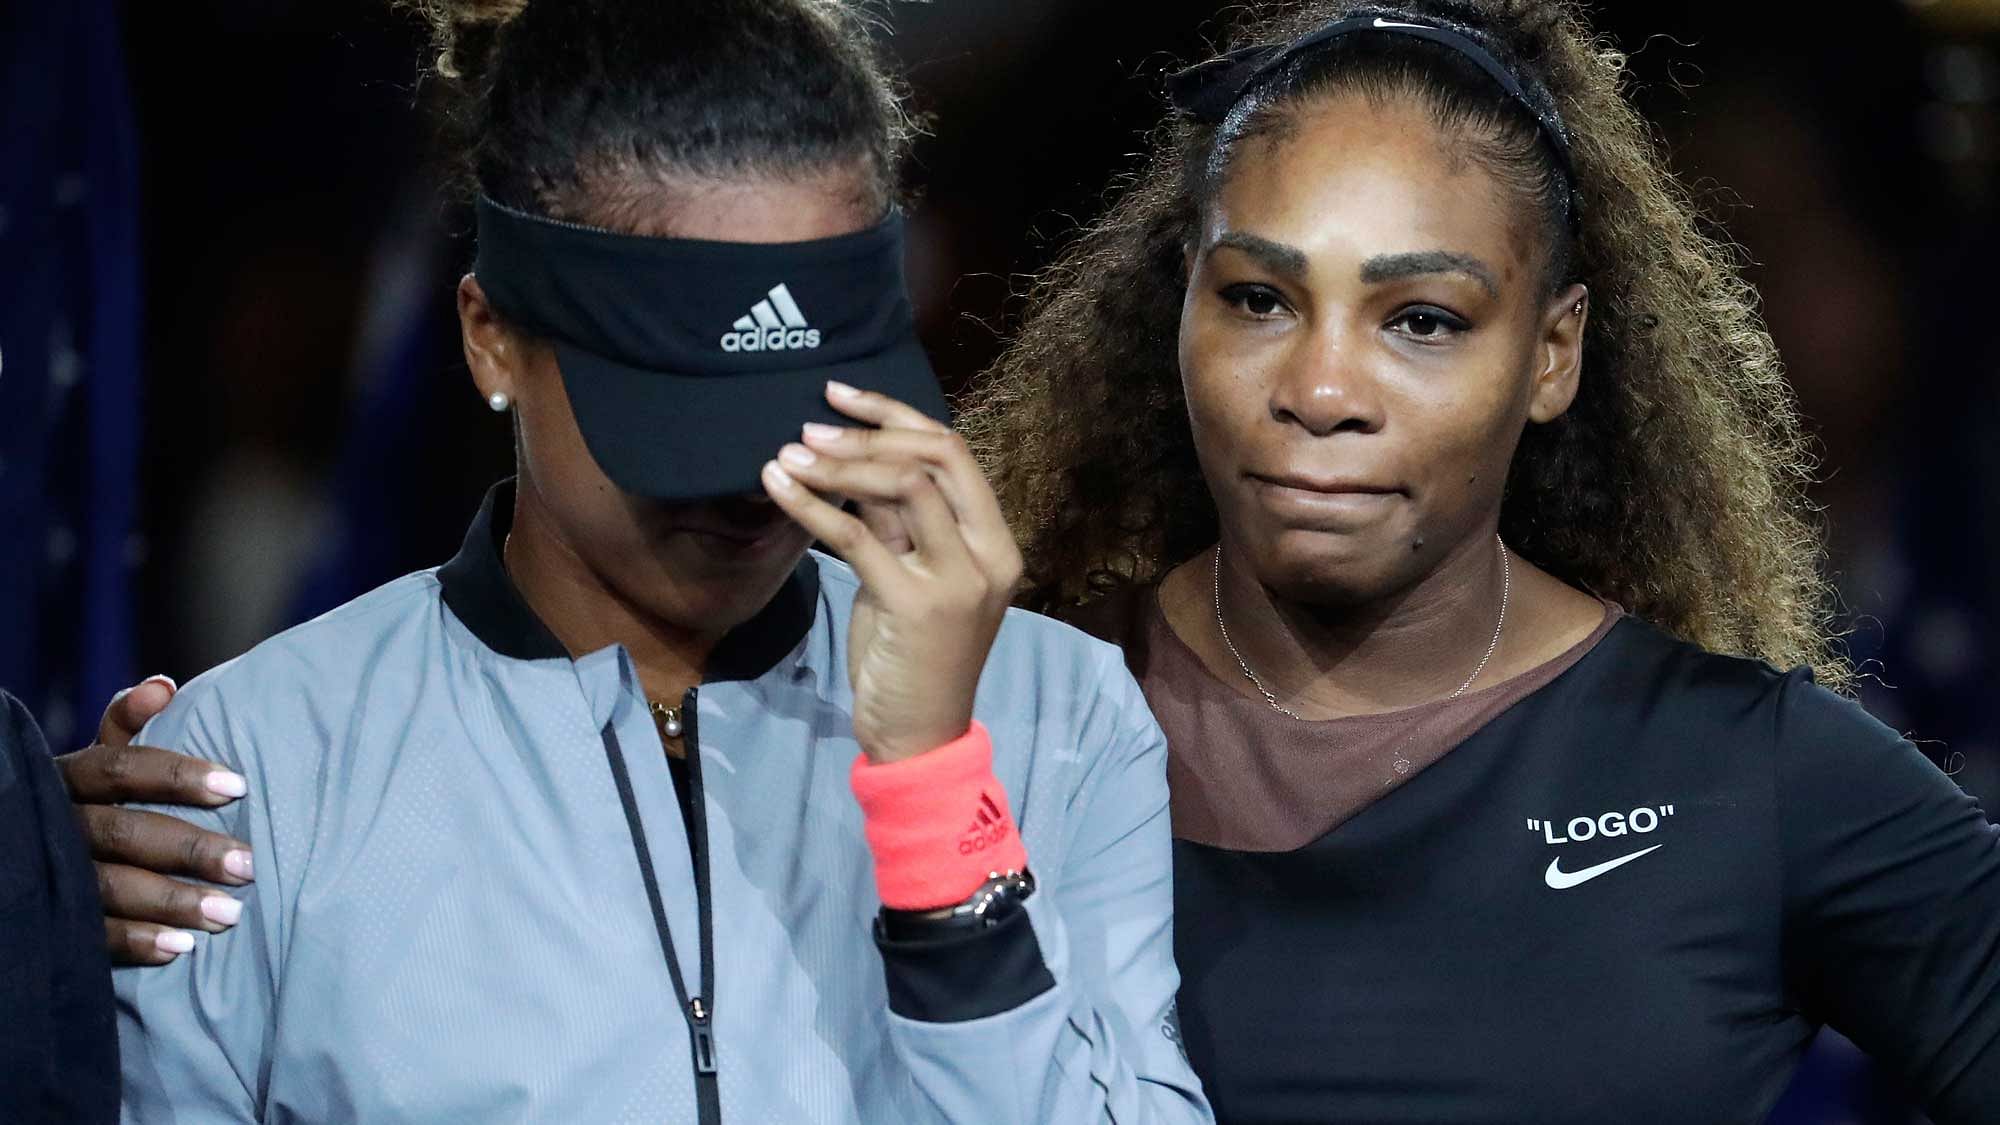 Serena Williams comforts Naomi Osaka whent the audience starts booing during the presentation ceremony of the 2018 US Open women’s final.